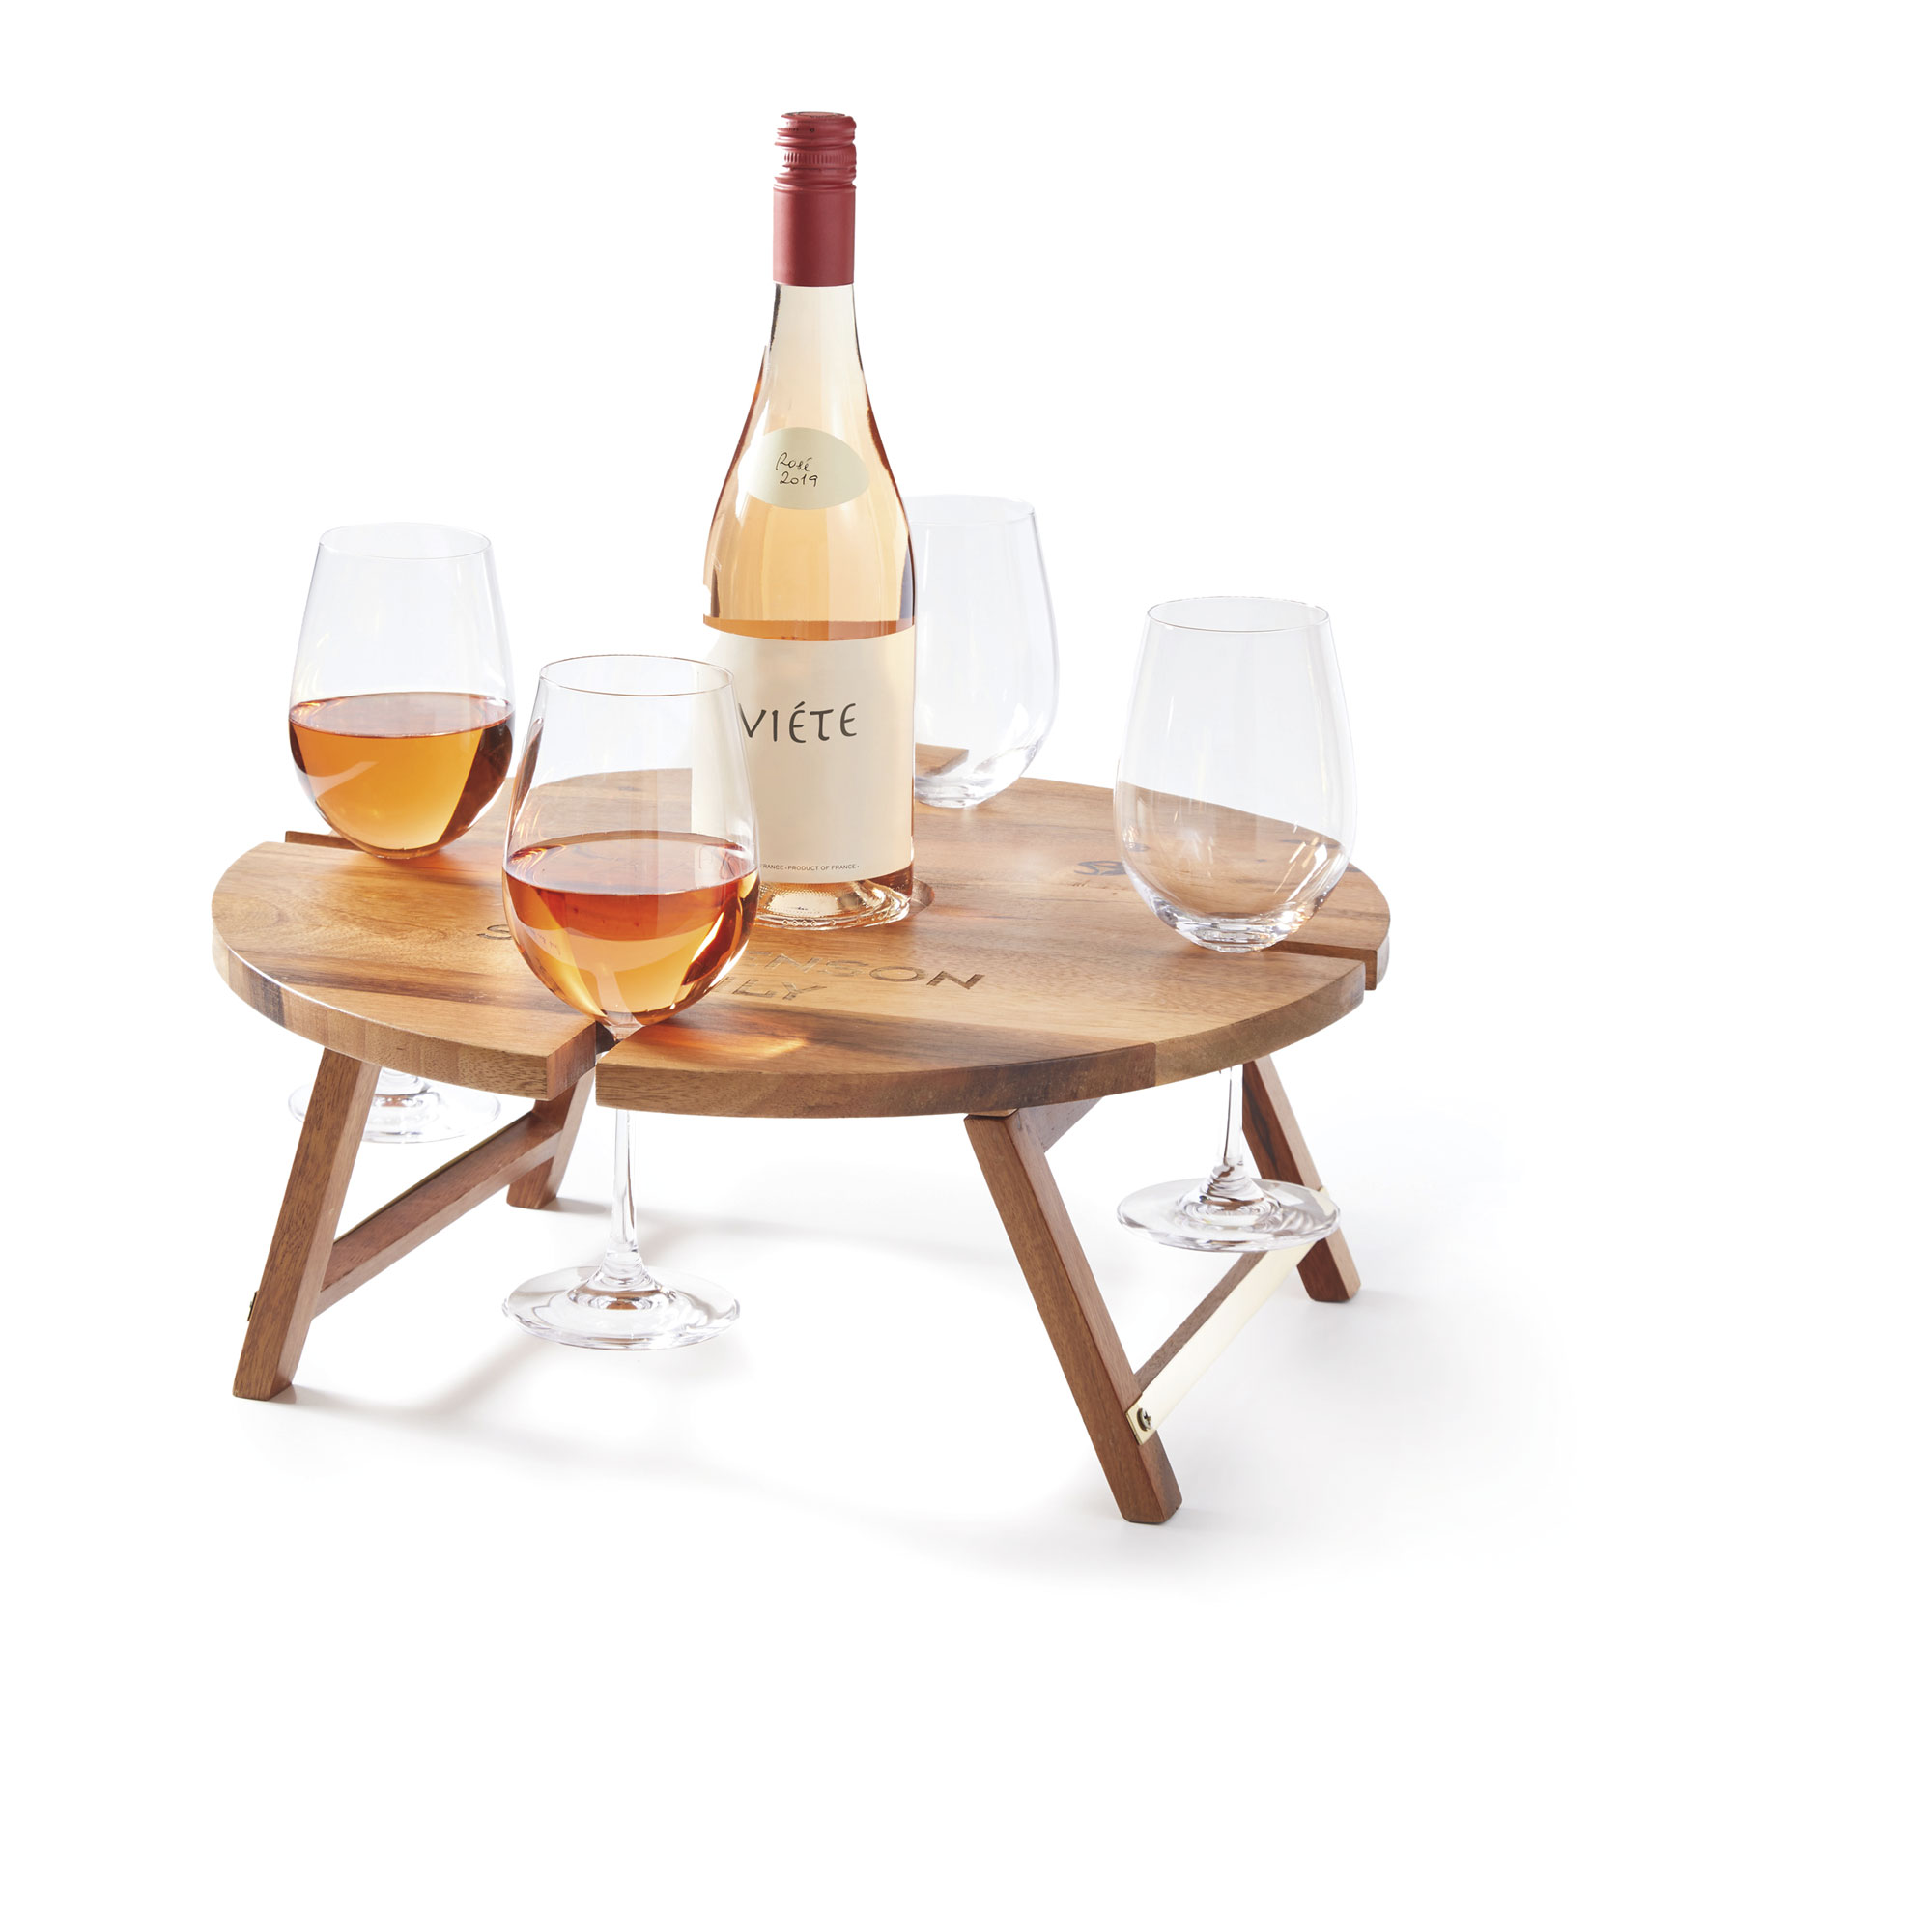 folding picnic table with wine glasses